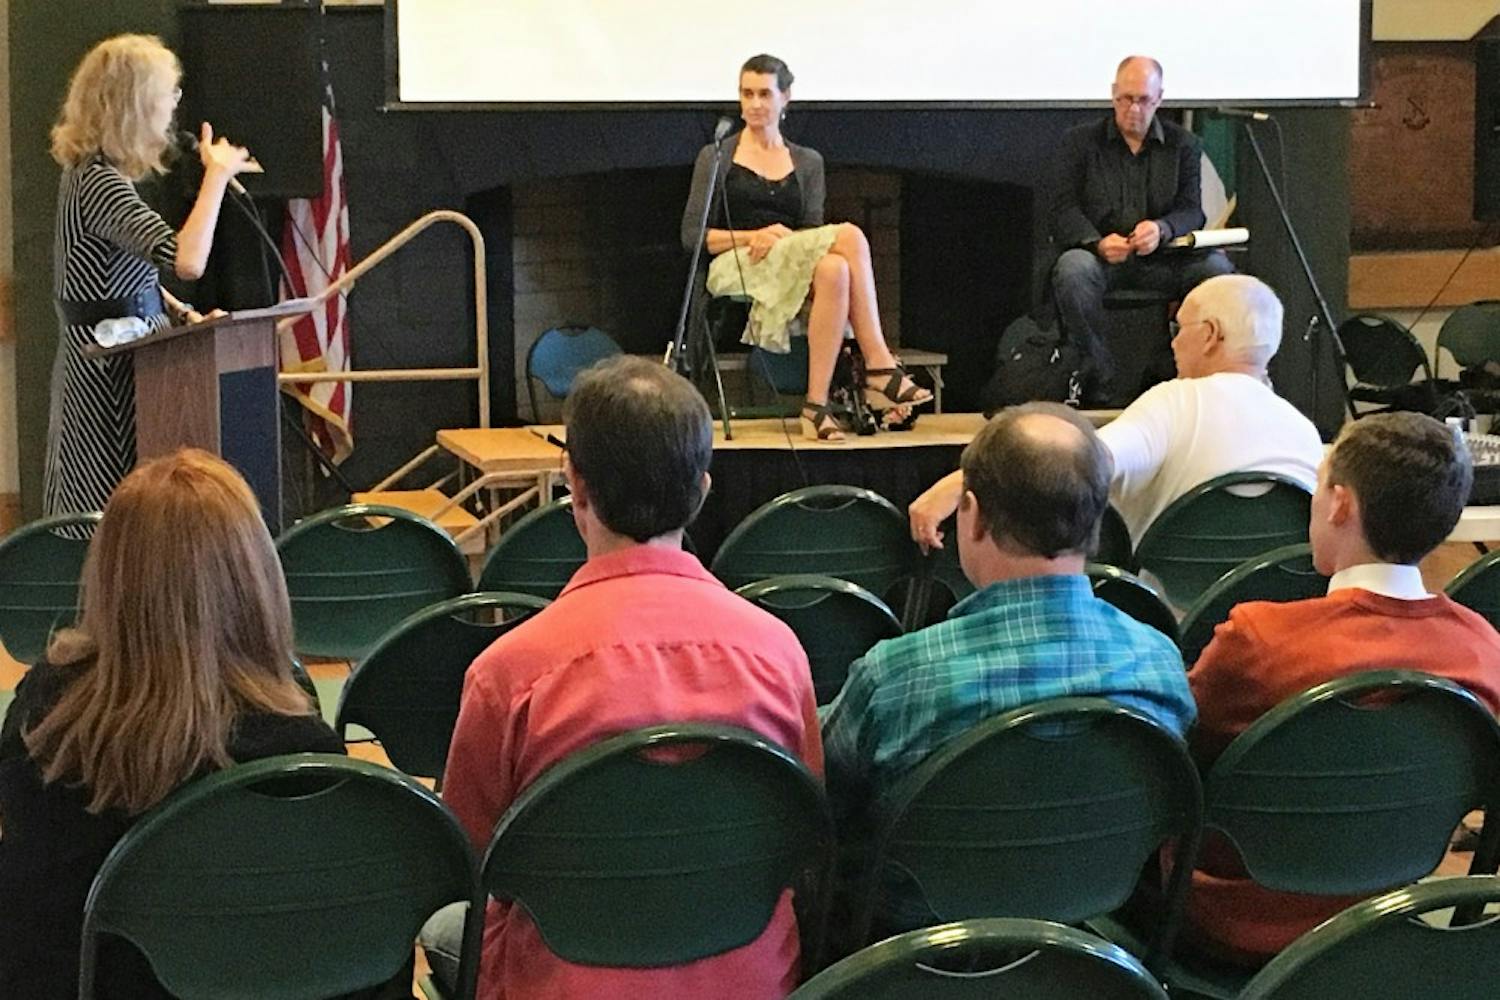 Authors Sarah Berkeley Tolchin, David Baker and ASU English professor Cynthia Hogue participate in a Q&A session at the 2015 Ennis Ireland Book Festival.